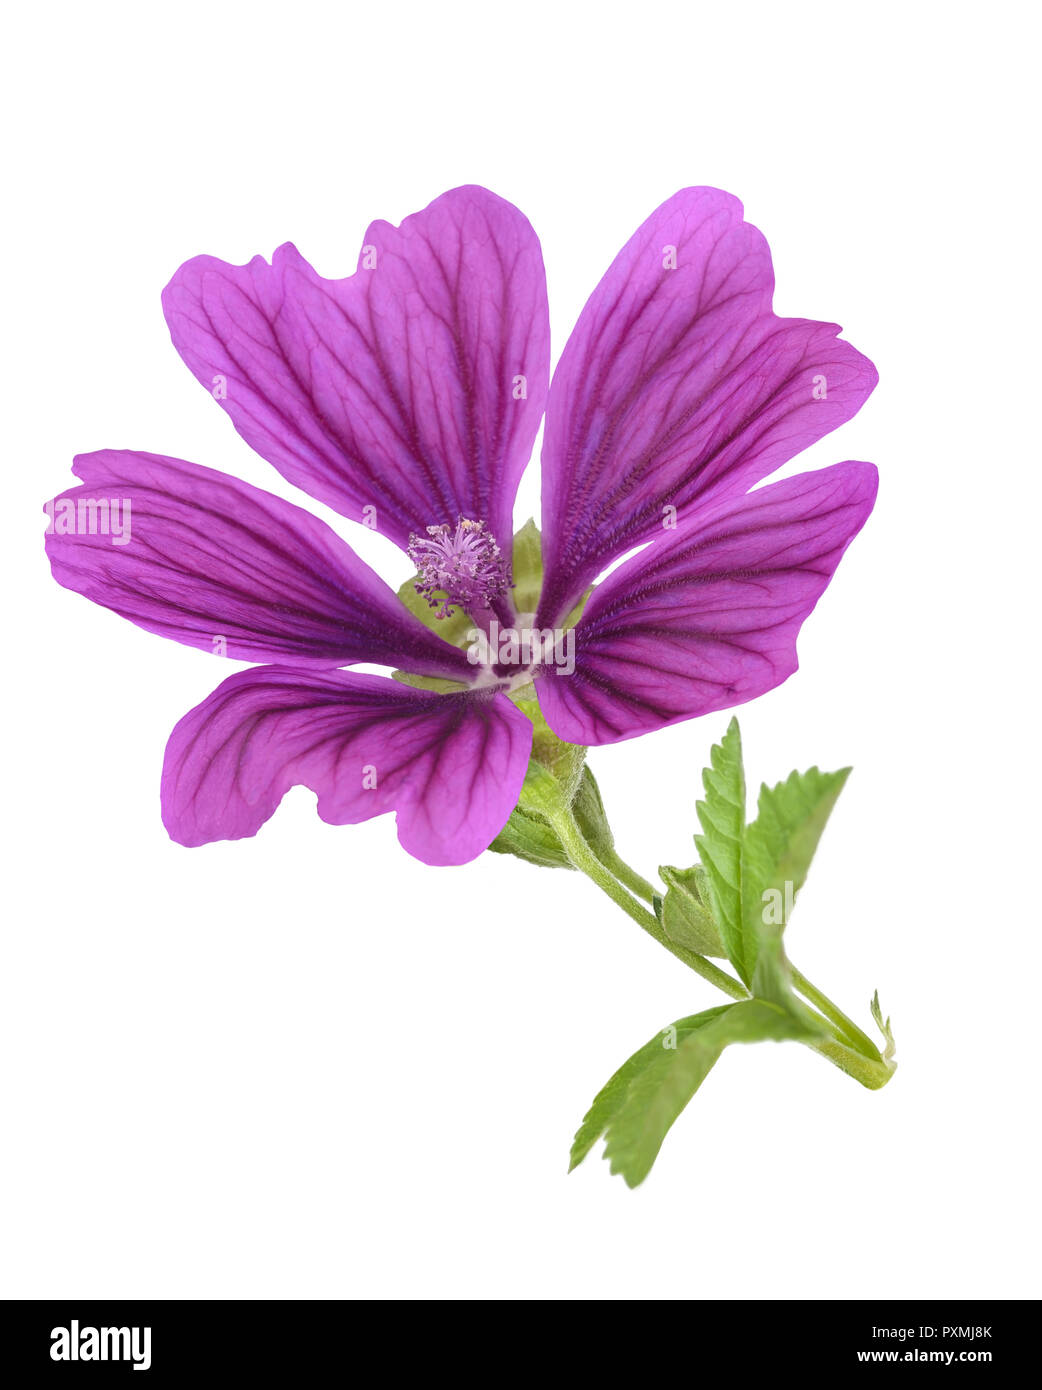 Mallow plant with flower isolated on white Stock Photo